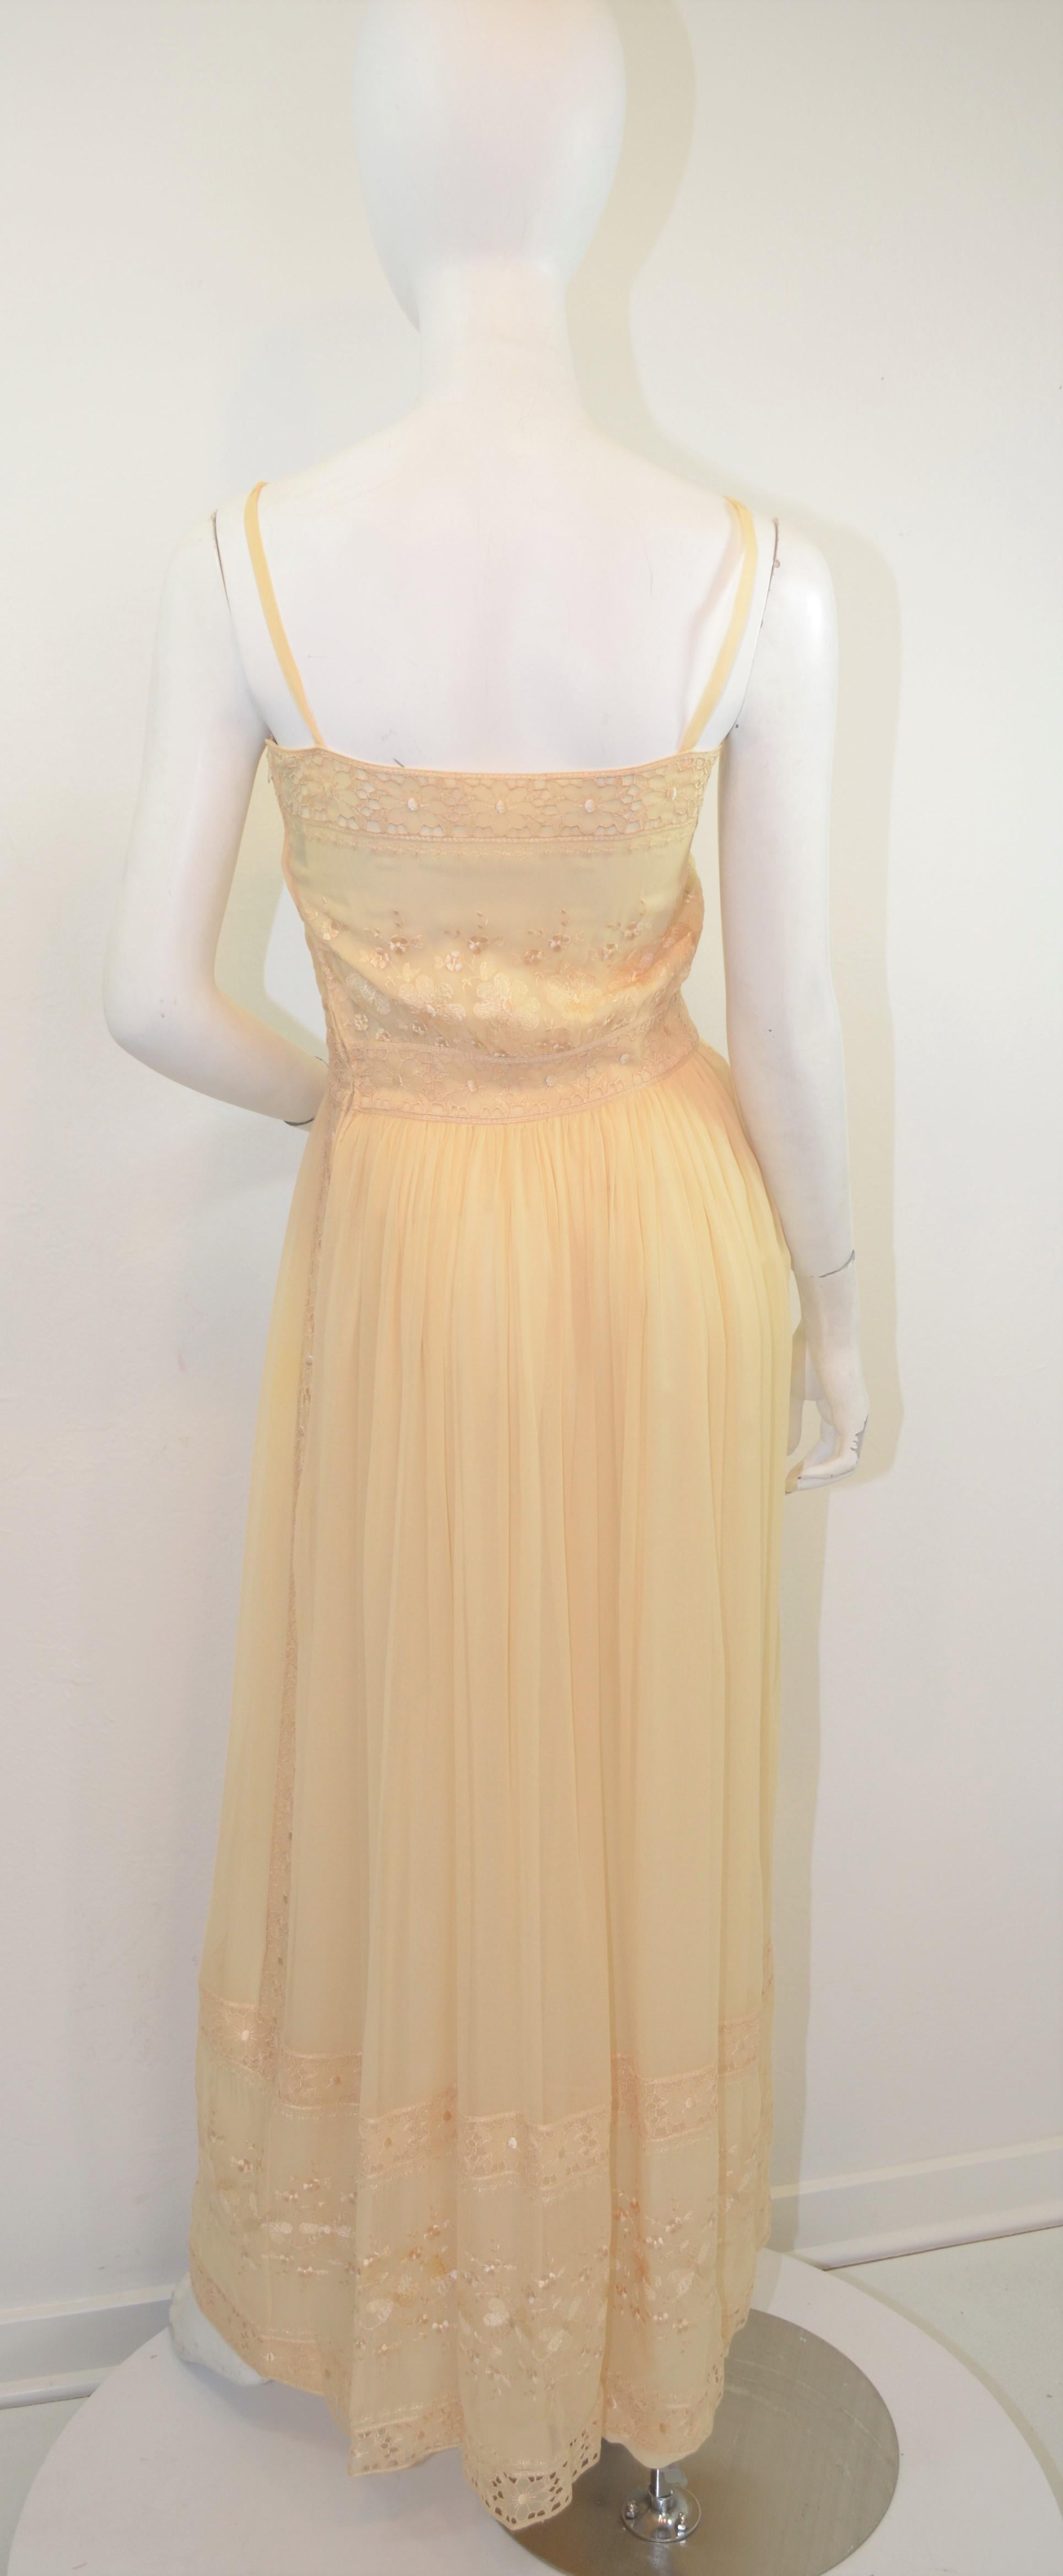 Women's Vintage Christian Dior Boutique Silk Chiffon Gown with Shawl